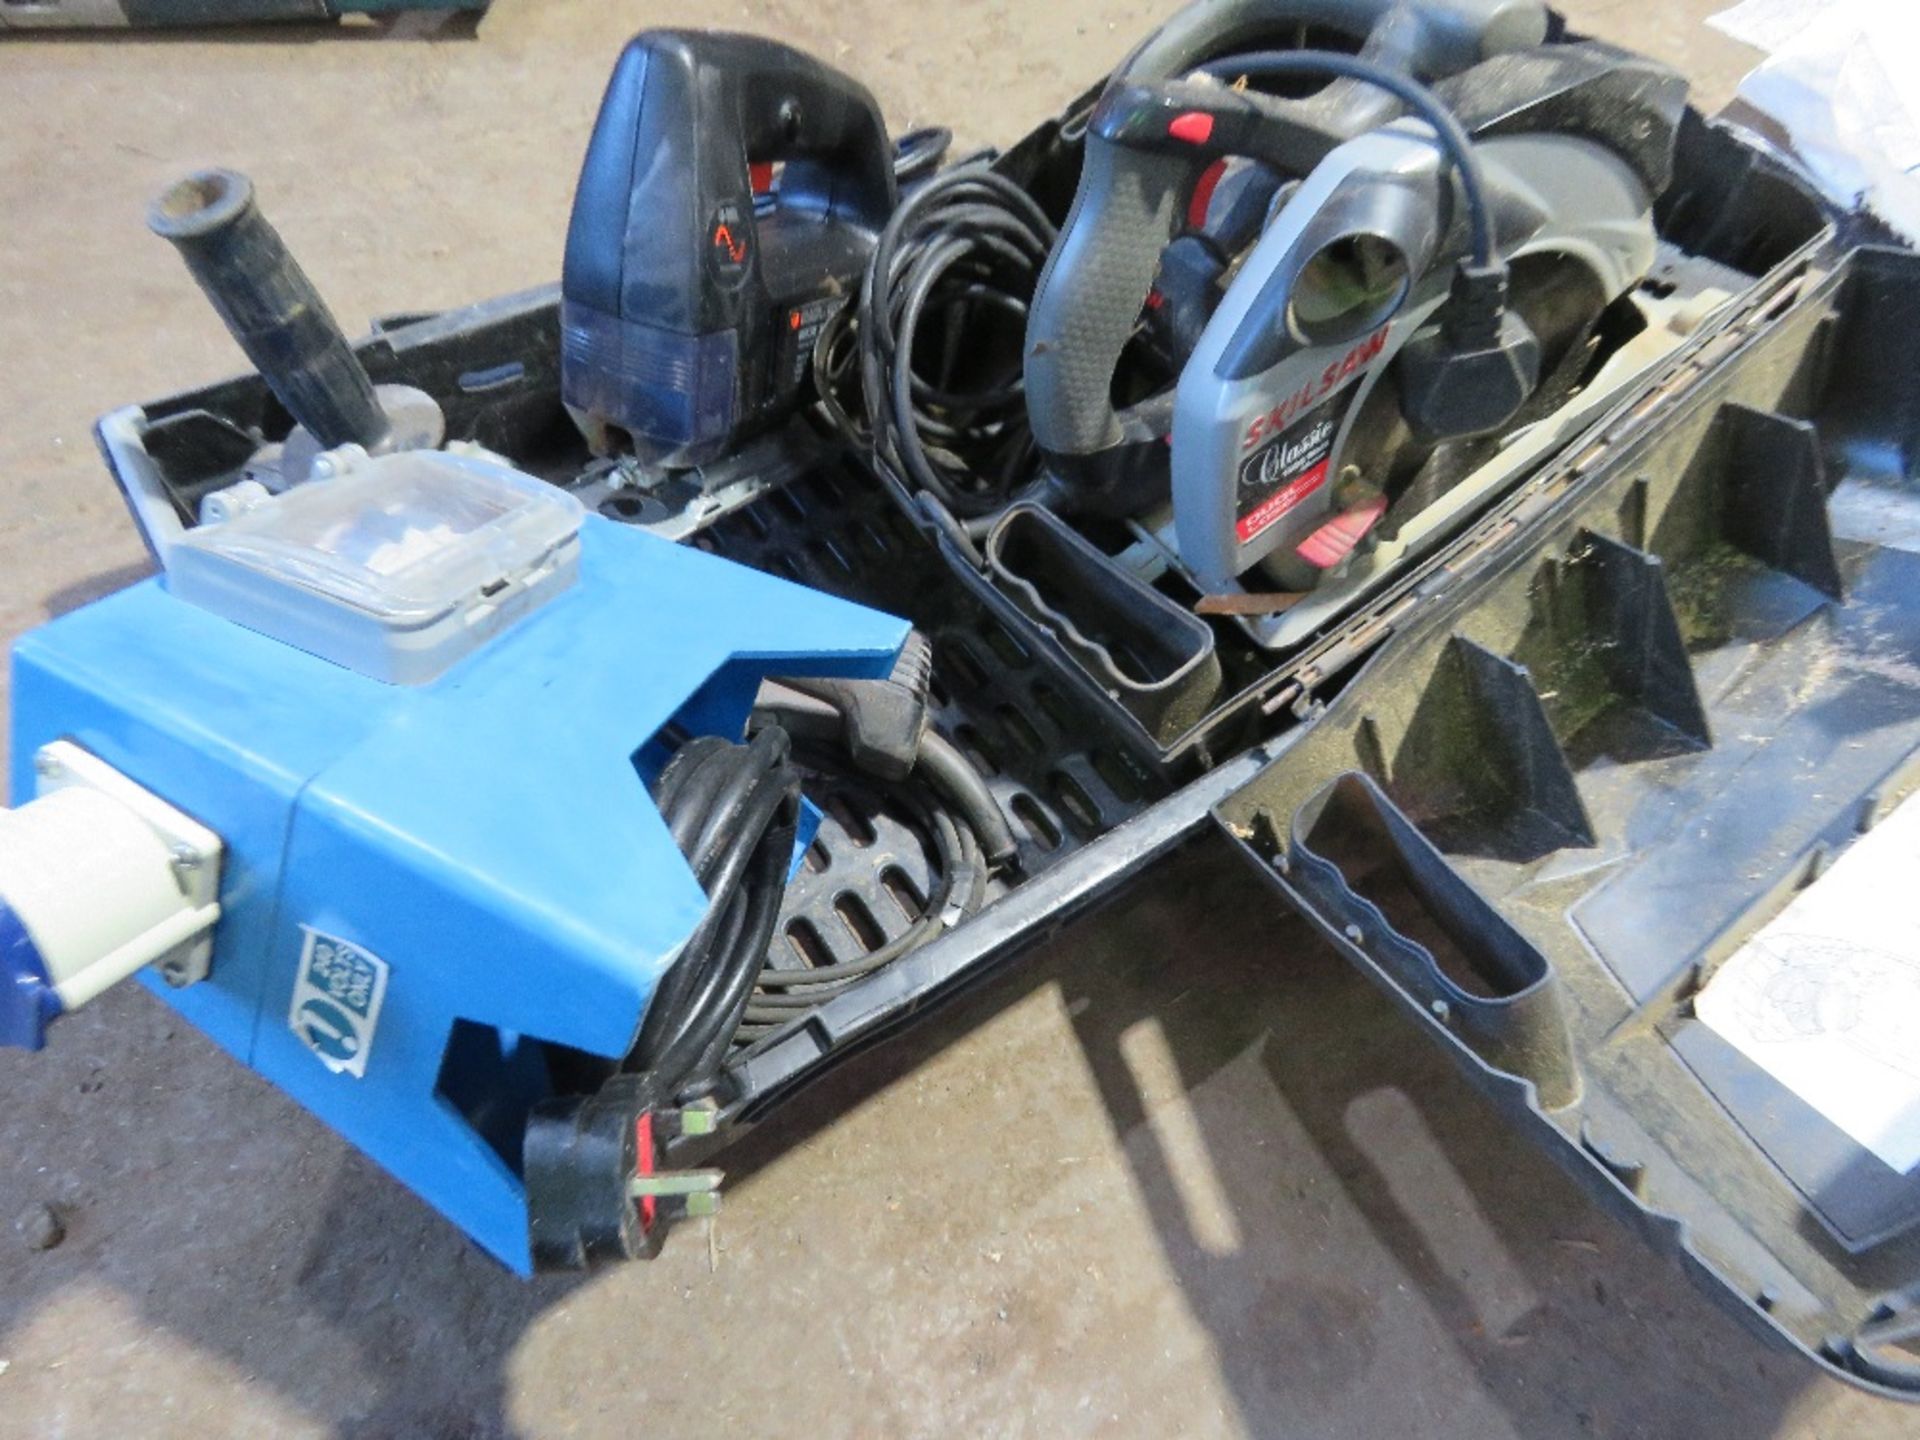 240V JIGSAW, GRINDER, CIRCULAR SAW AND JUNCTION SAW IN BOX. - Image 3 of 3